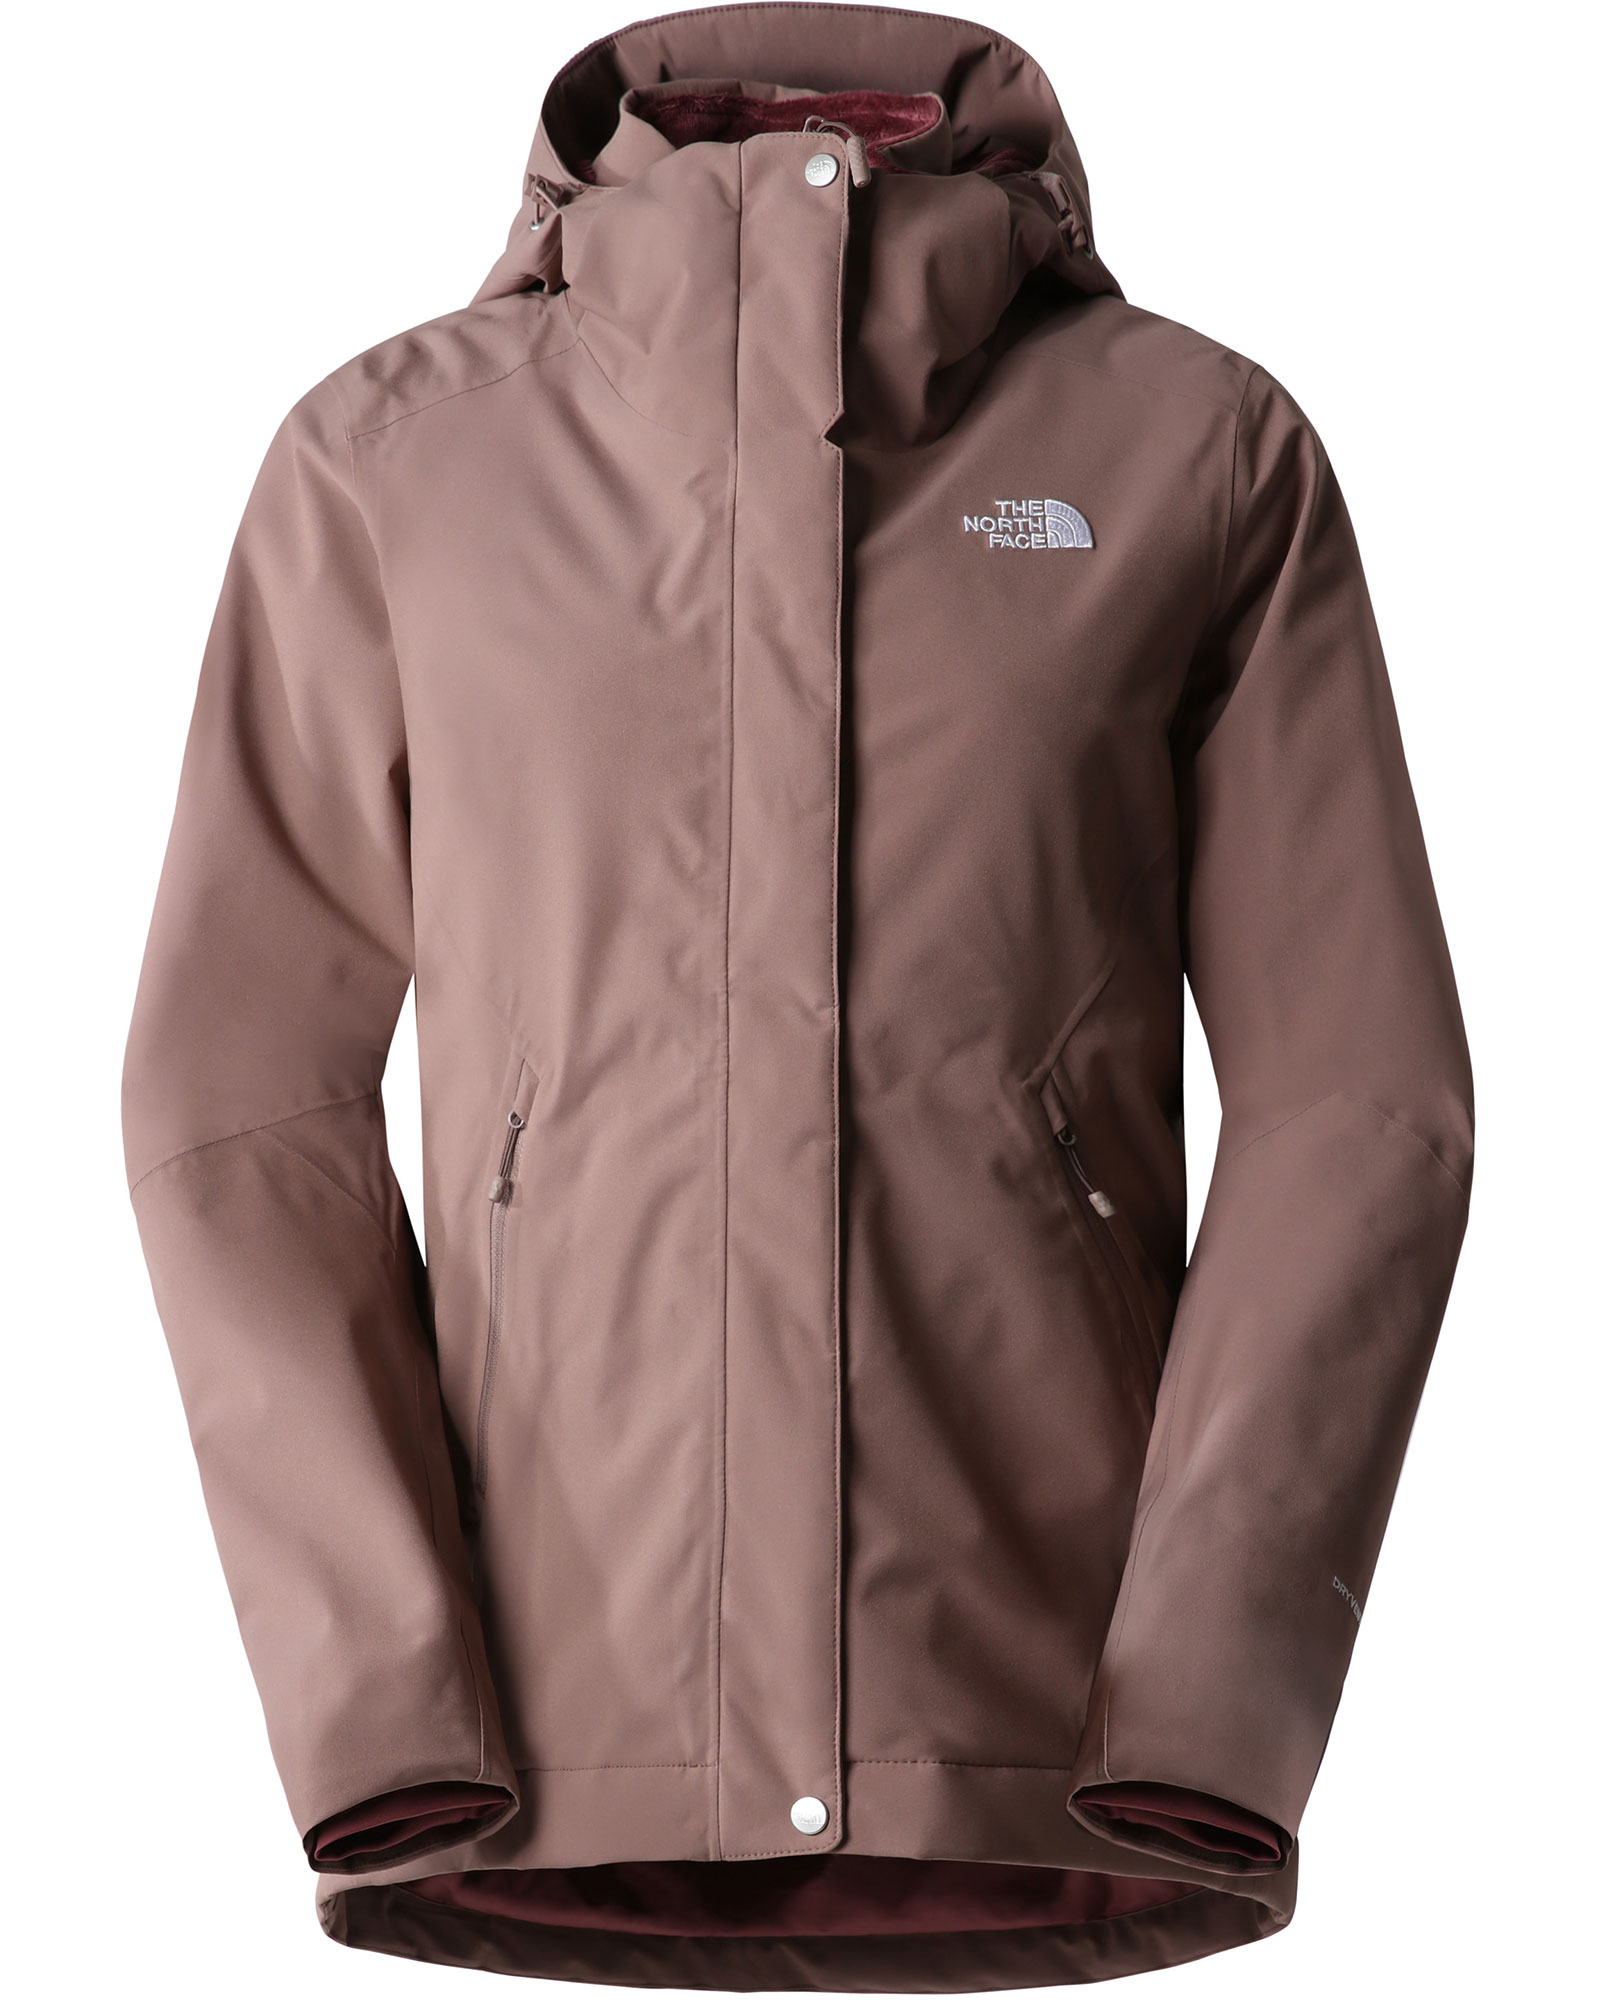 The North Face Inlux Insulated DryVent Women’s Insulated Jacket - Deep Taupe S